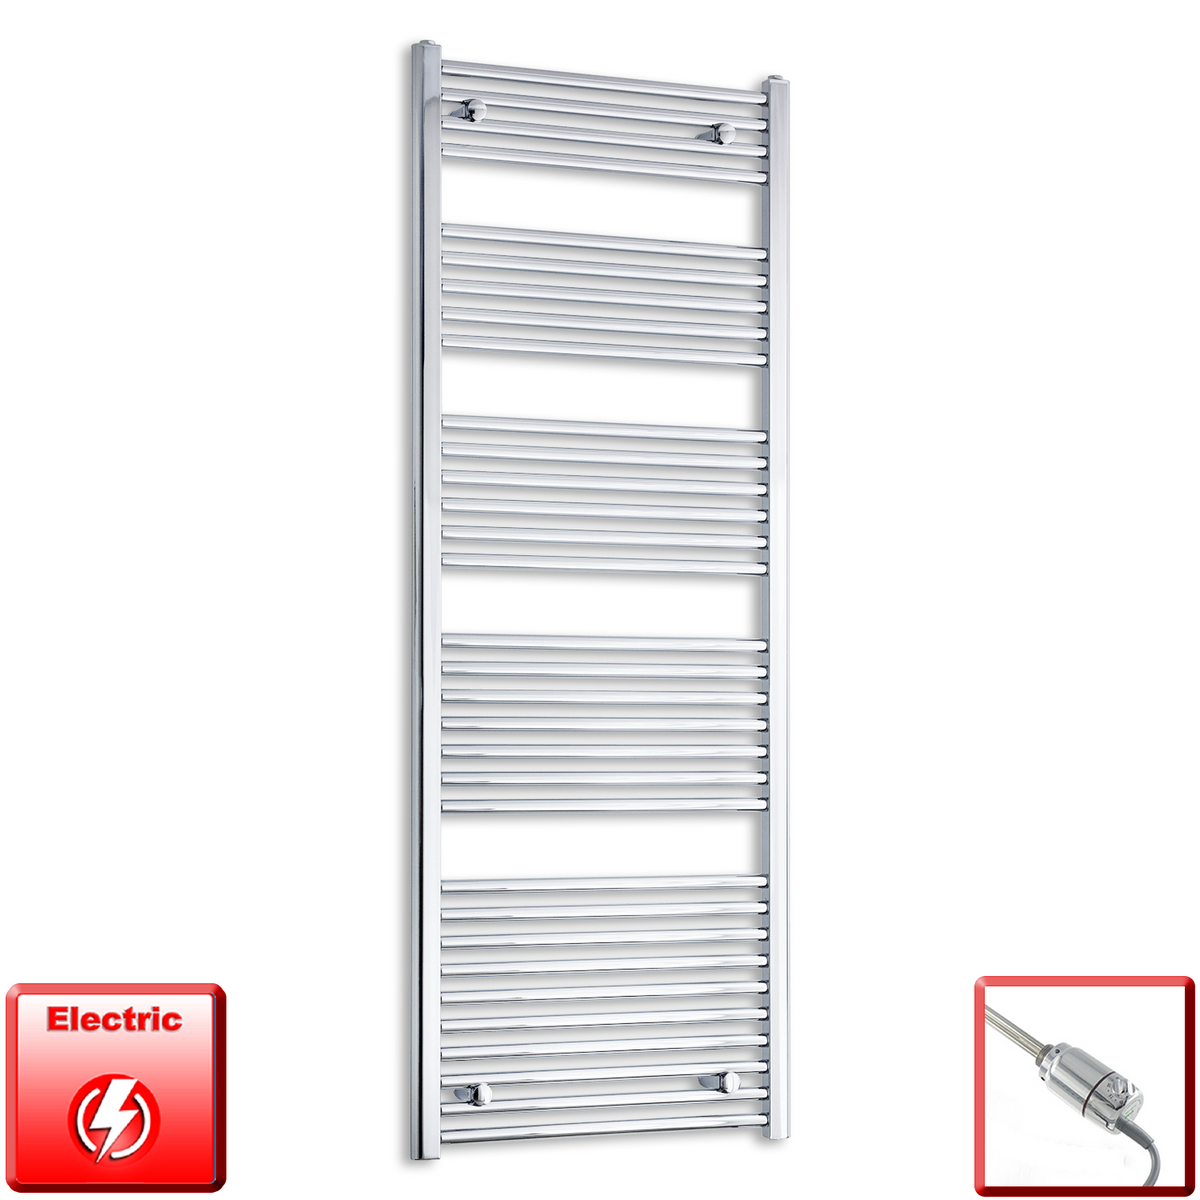 500mm Wide 1600mm High Pre-Filled Chrome Electric Towel Rail Radiator With Thermostatic GT Element